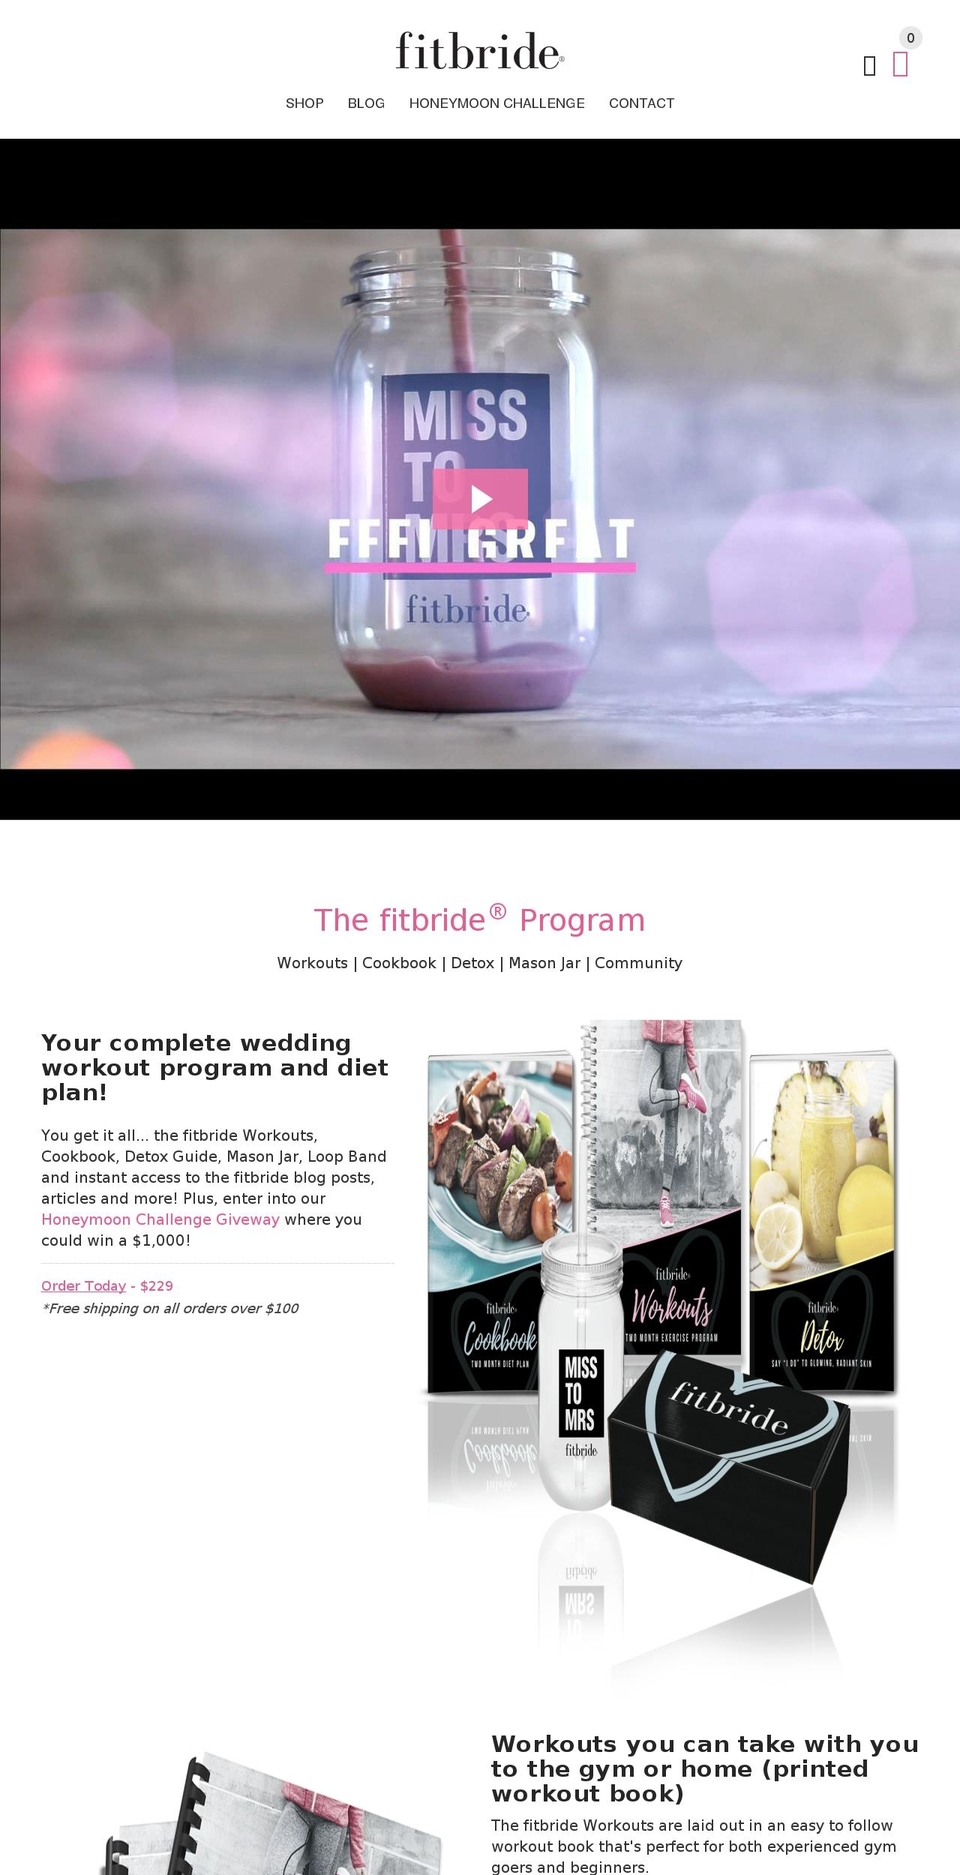 FitBride Development - YourStore Theme Shopify theme site example fitbride.com